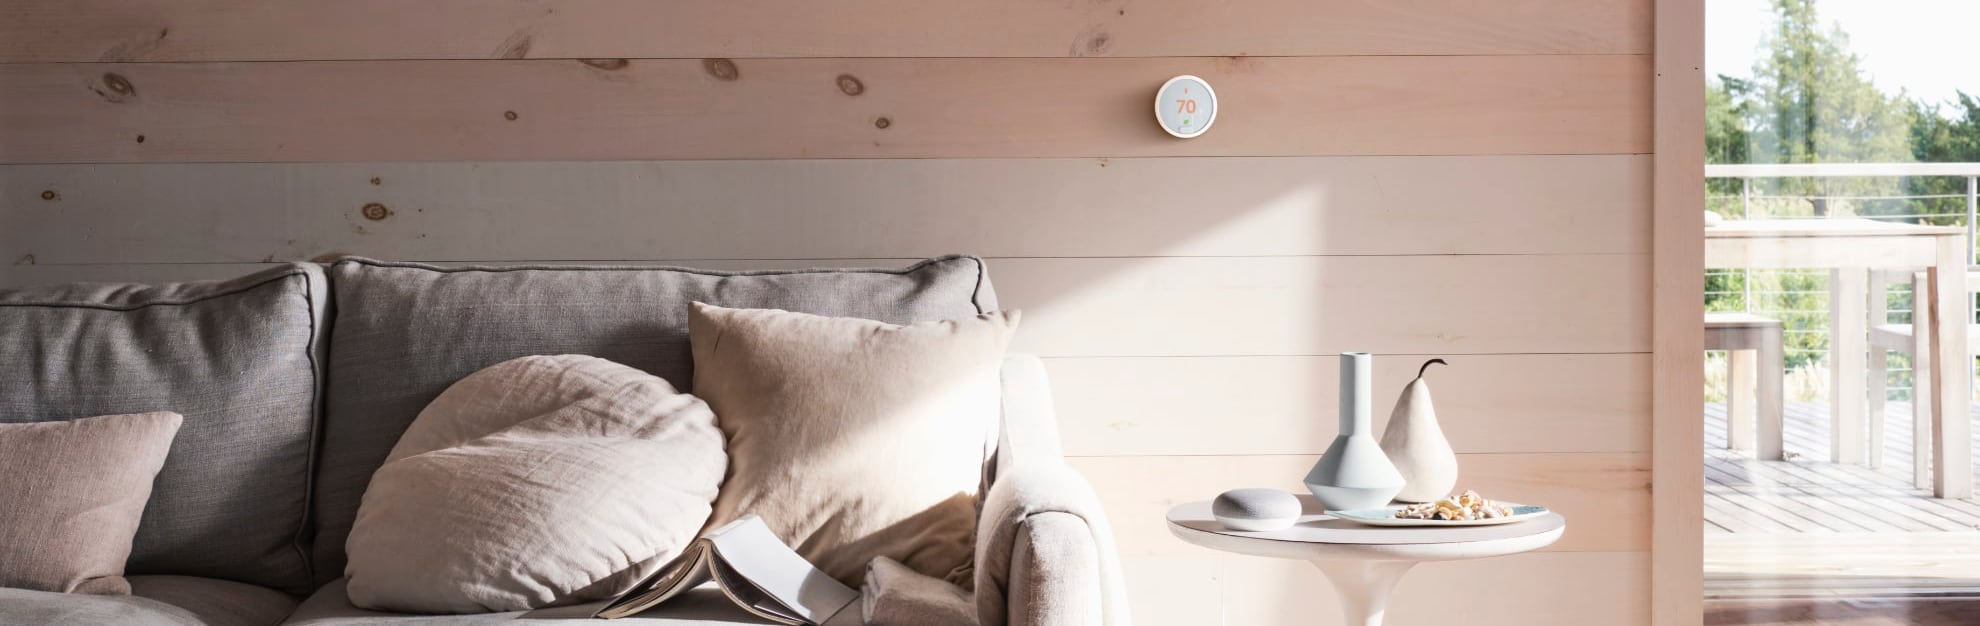 Vivint Home Automation in St. George